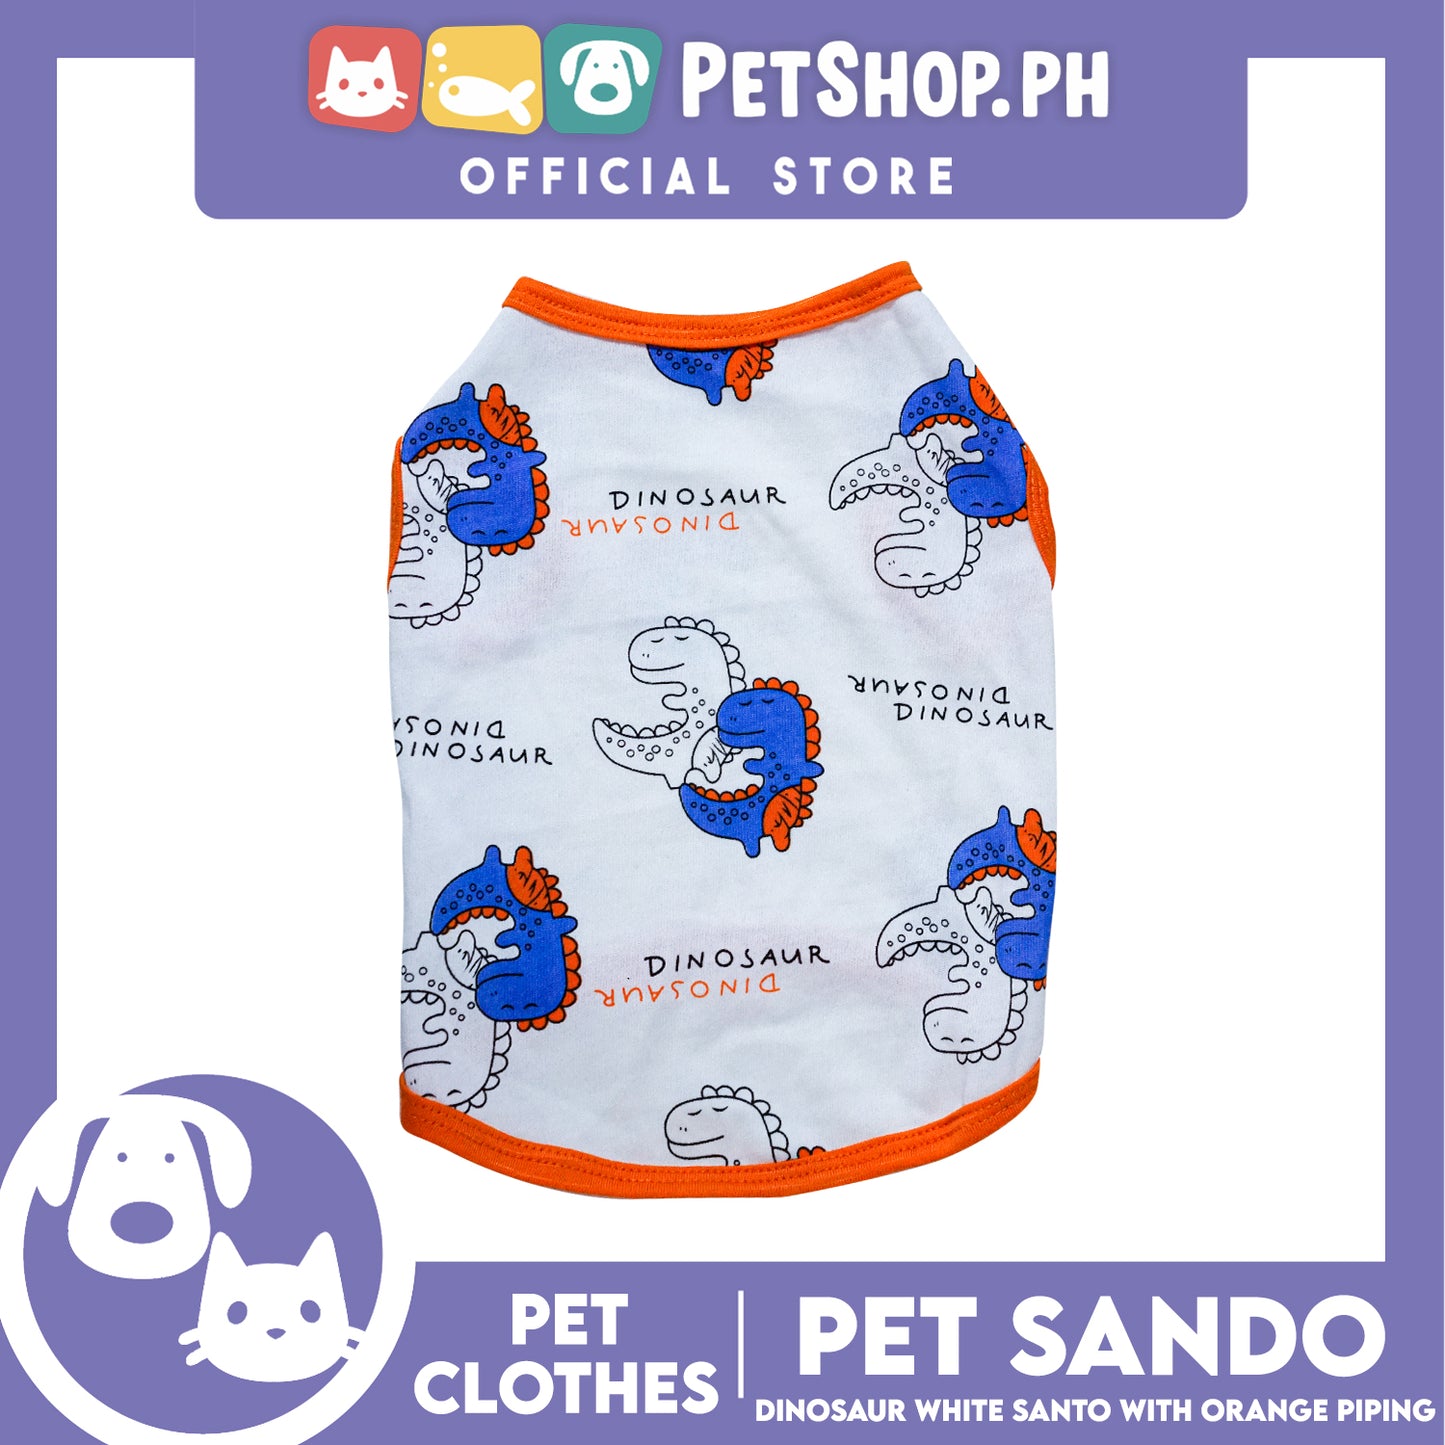 Pet Sando Dinosaur White with Orange Piping Sando (Large) Perfect Fit for Dogs and Cats